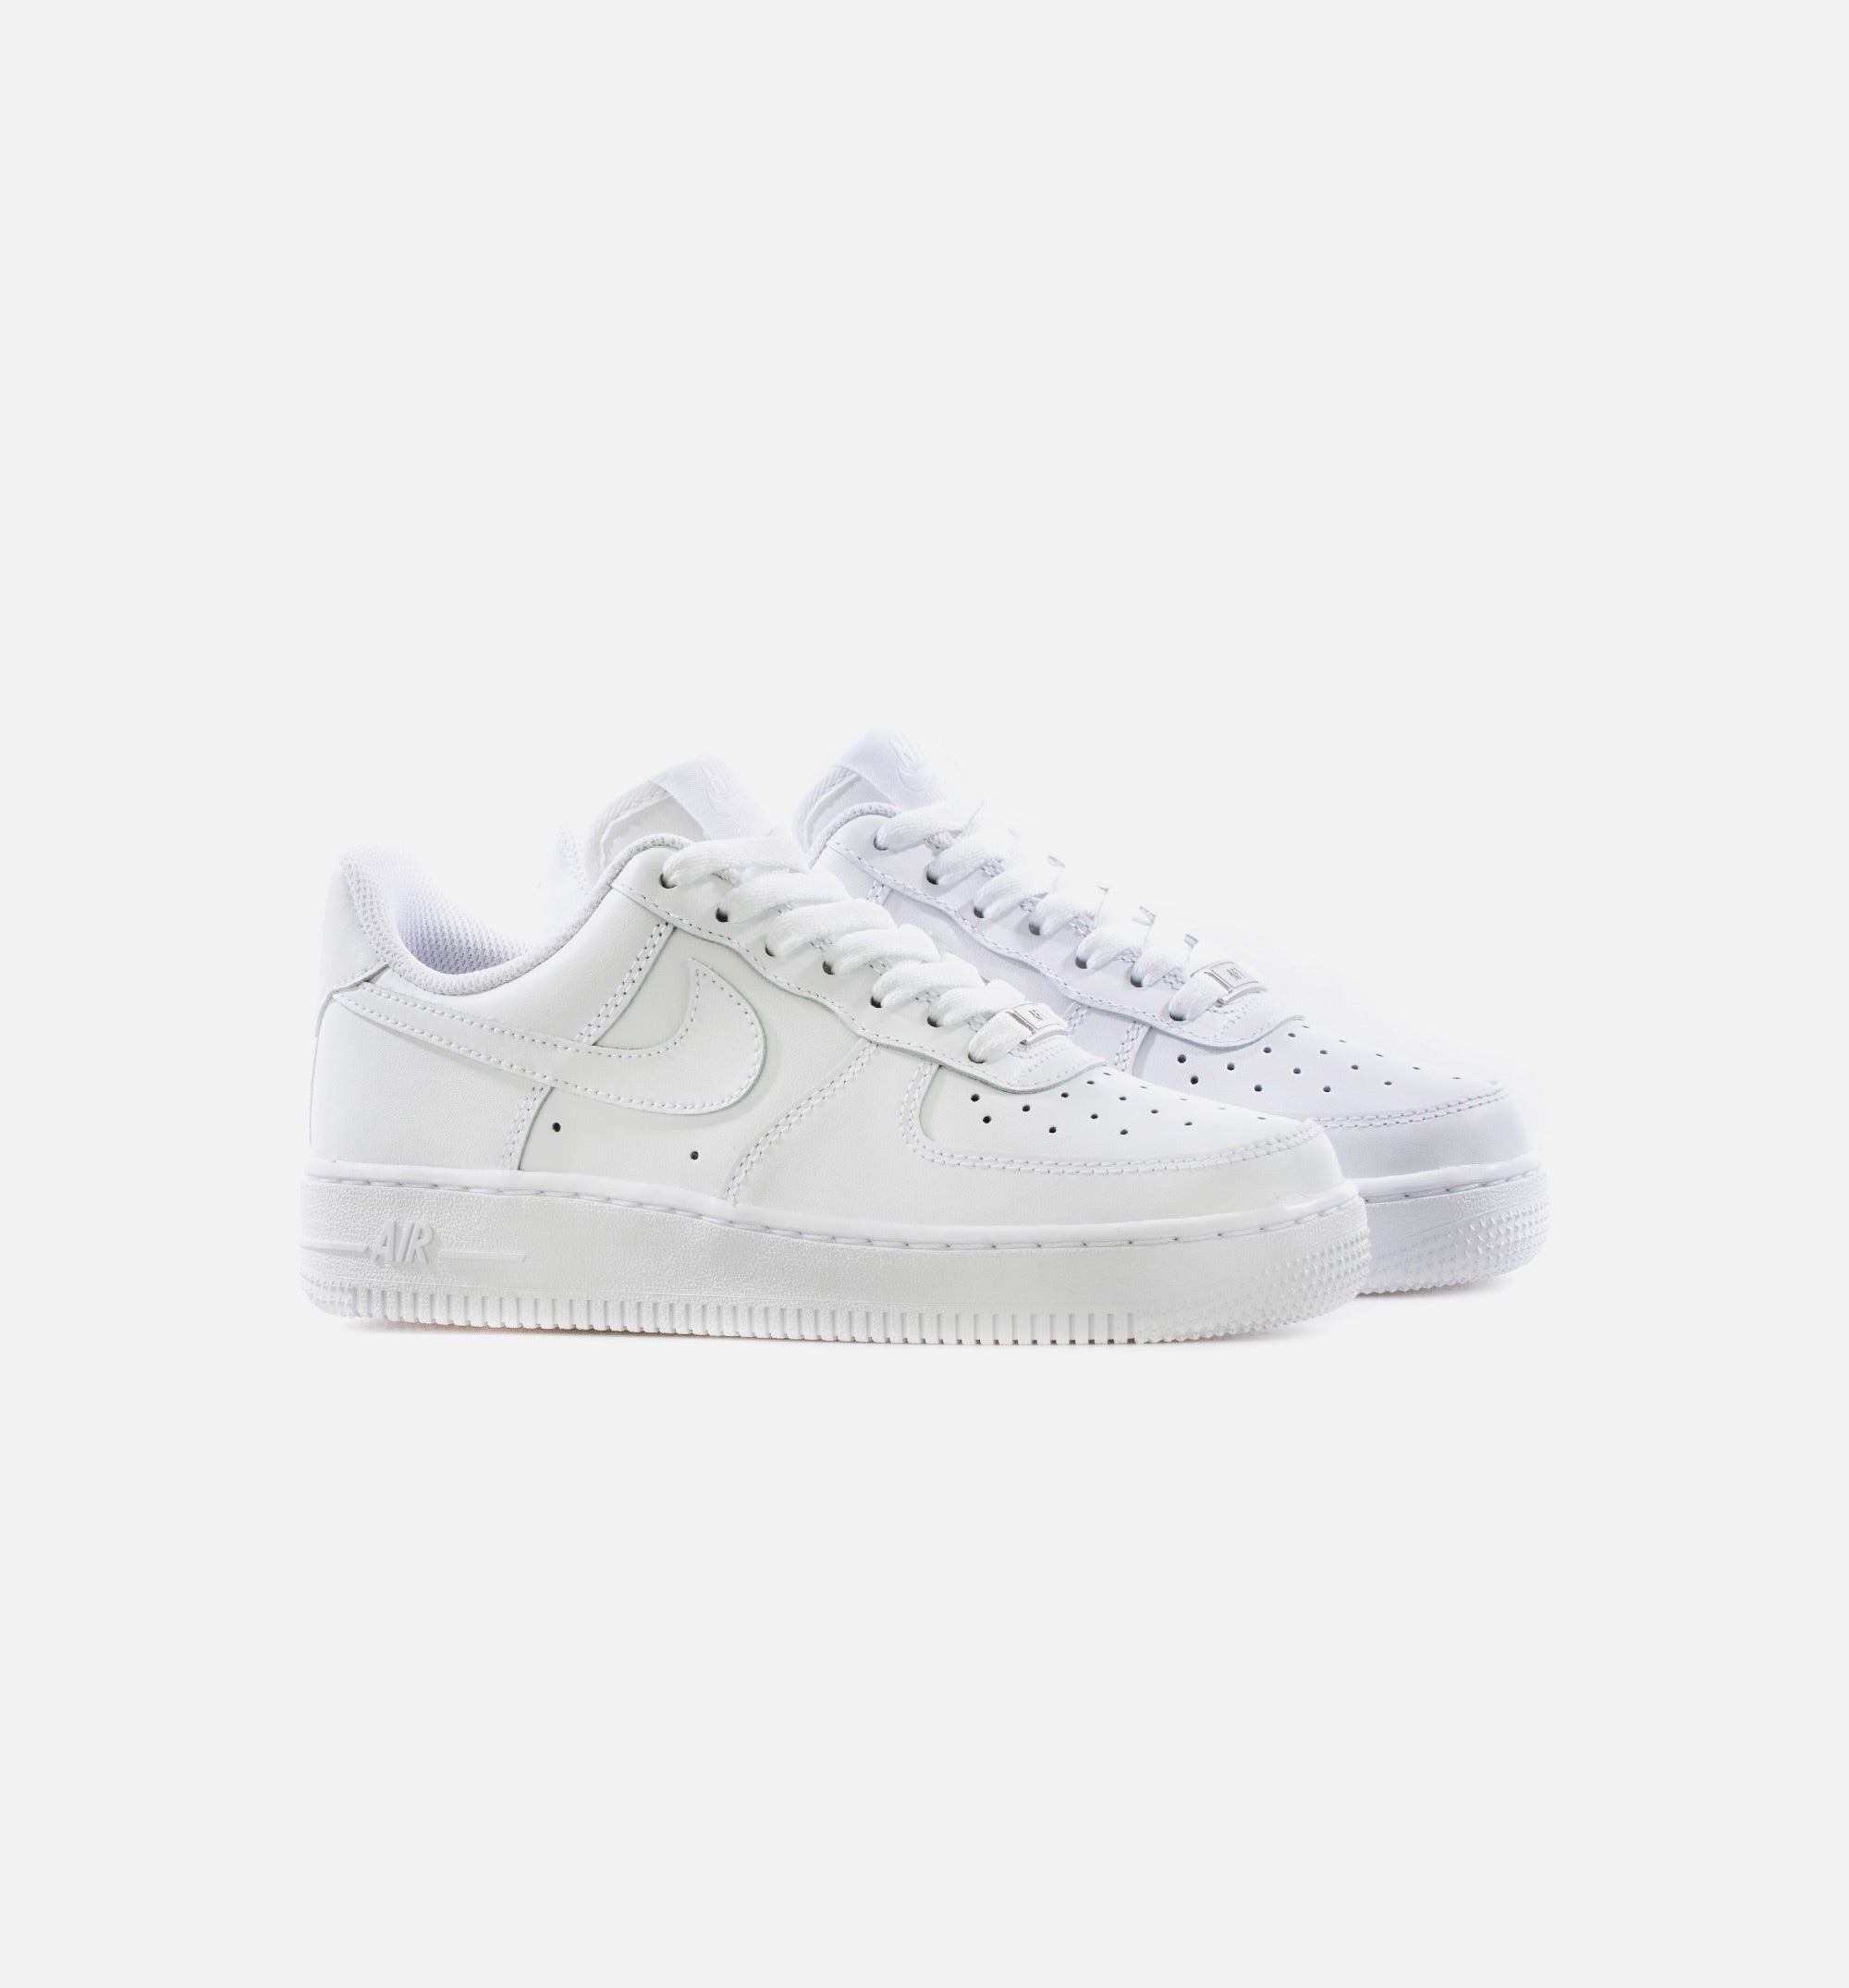 Nike Air Force 1 '07 DD8959-100 Women's White Leather Shoes Size